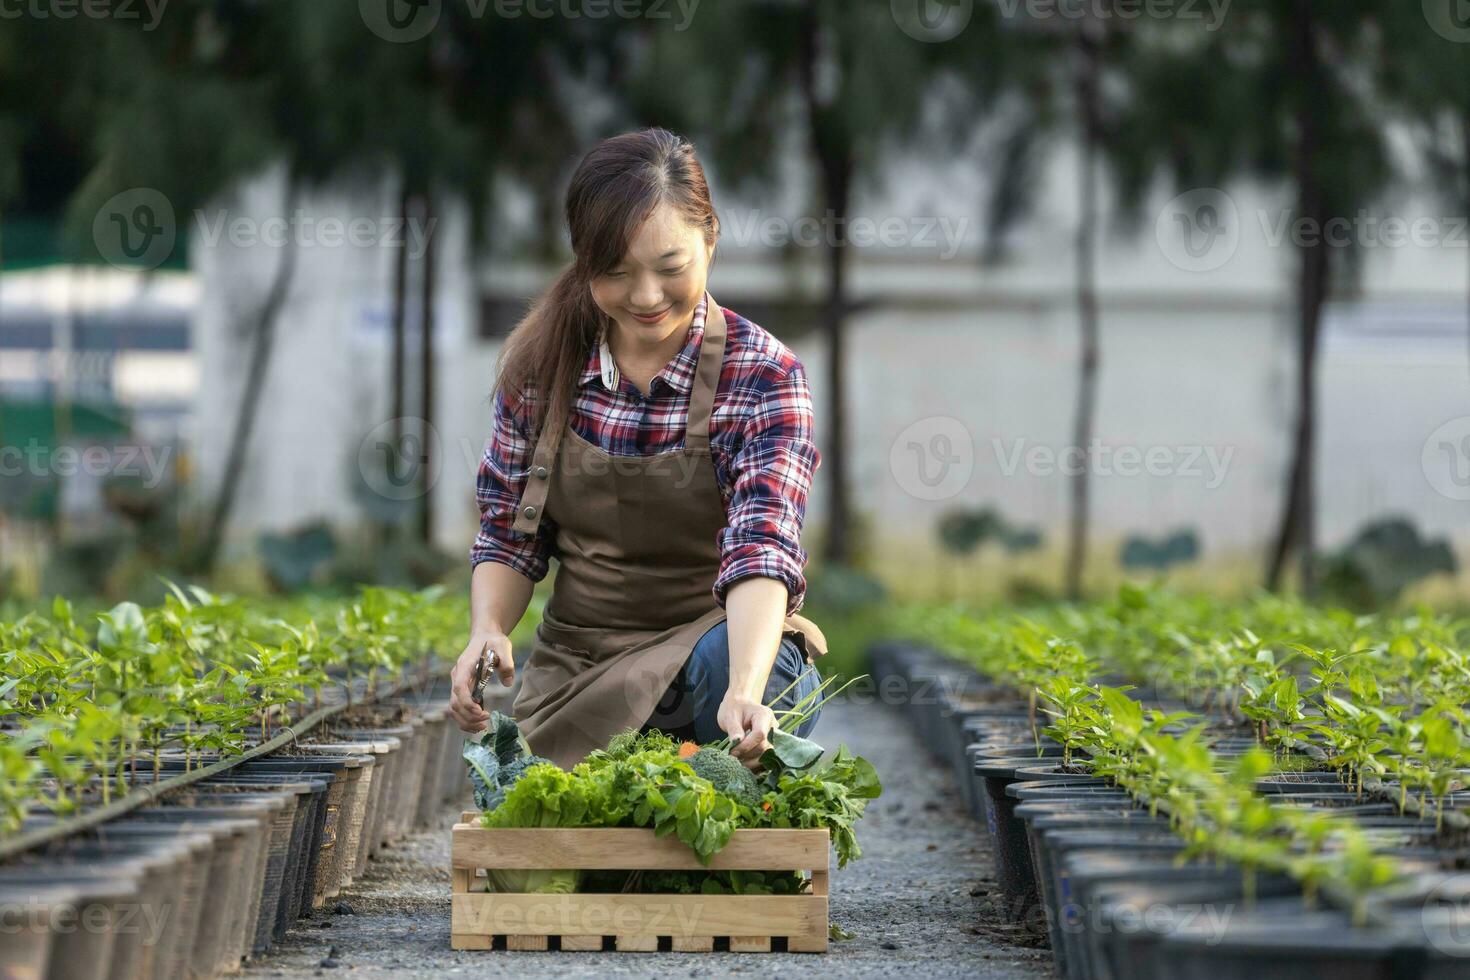 Asian woman farmer is showiing the wooden tray full of freshly pick organics vegetables in her garden for harvest season and healthy diet food concept photo